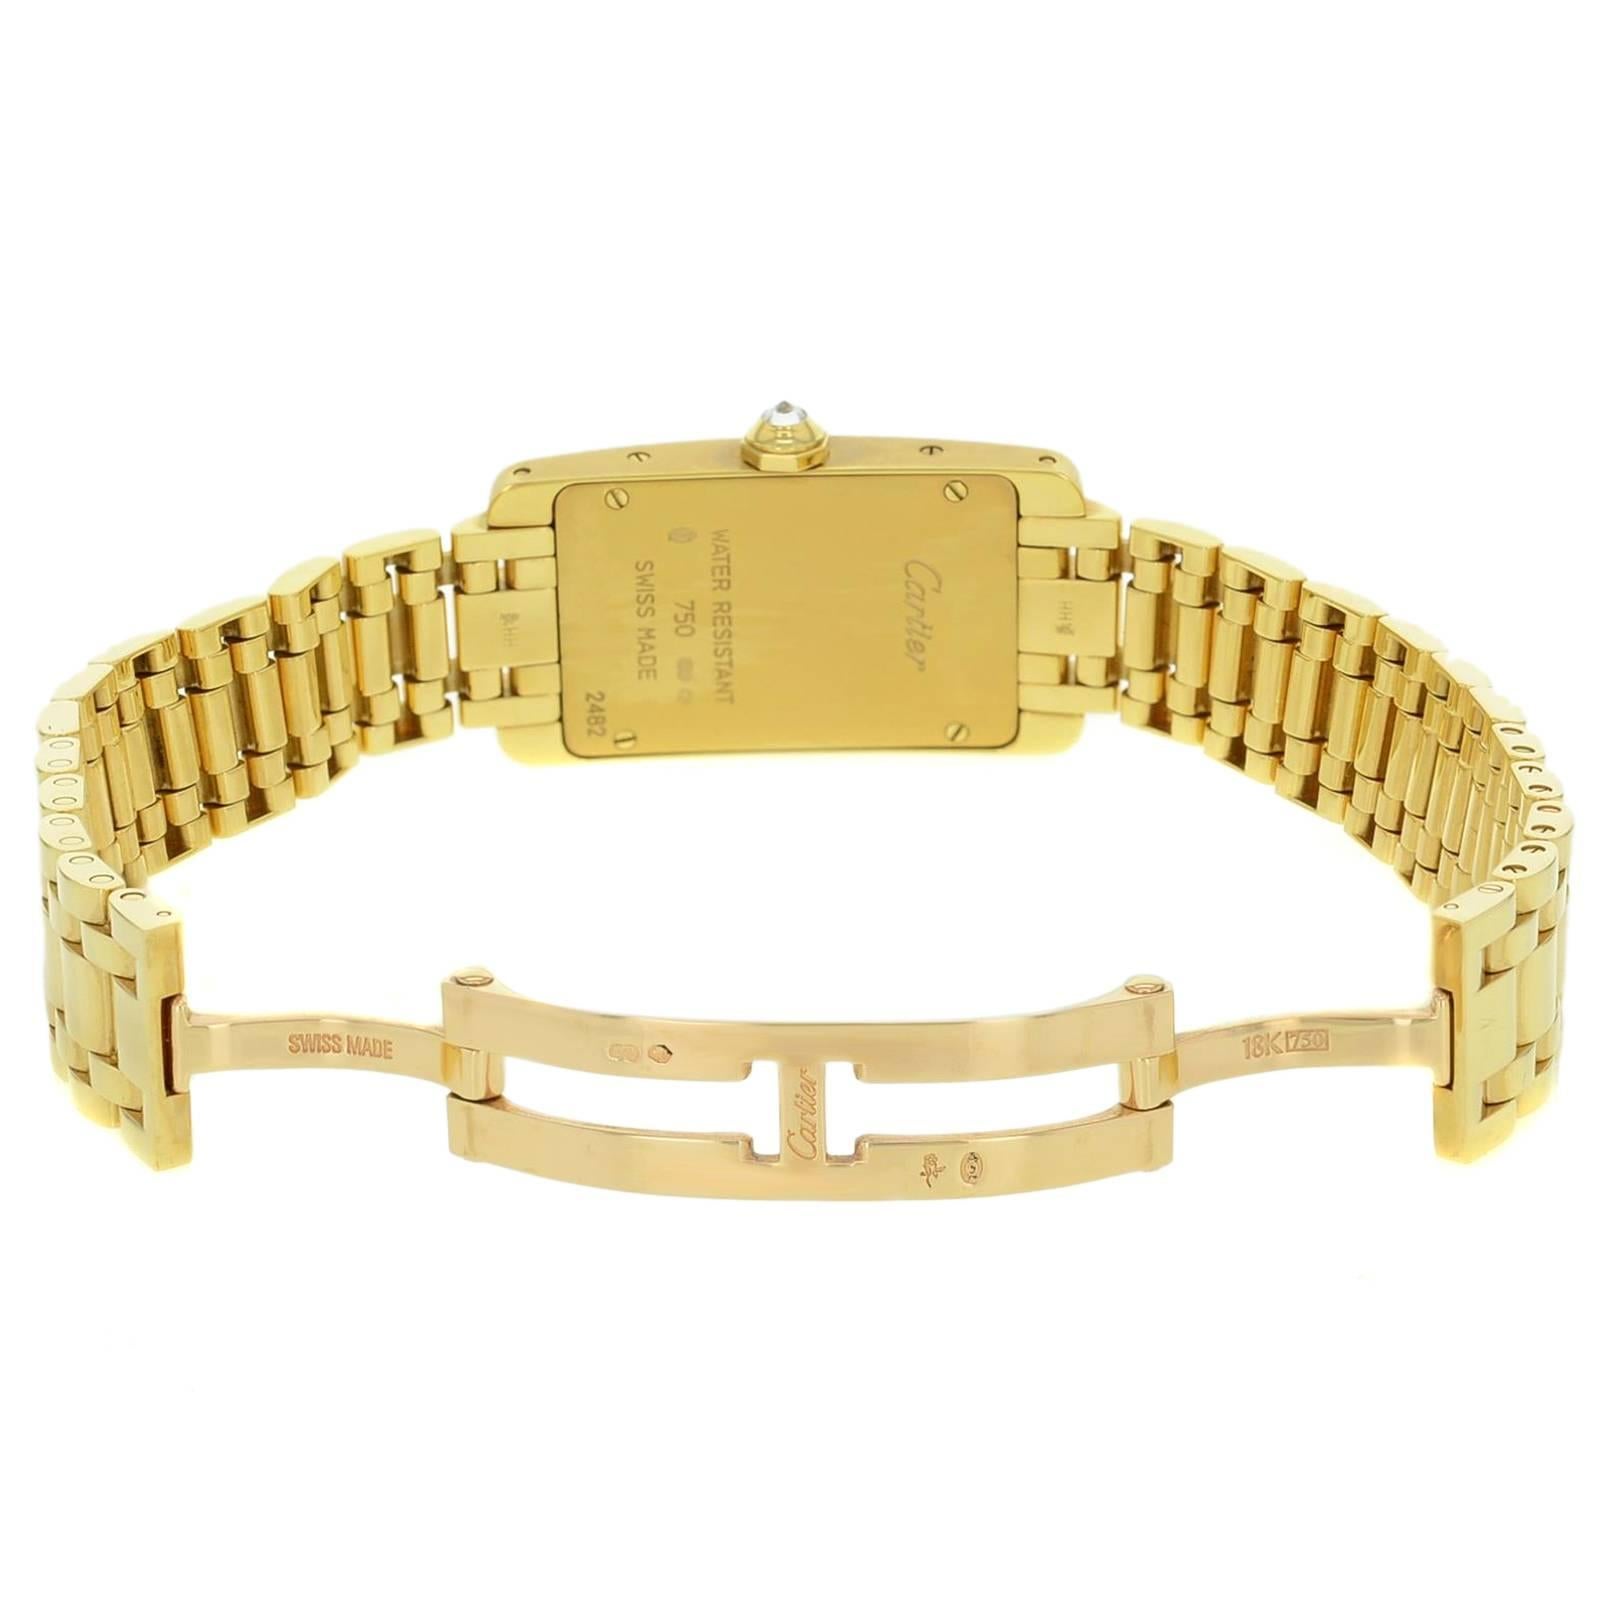 Brand: Cartier
Series: Tank
Model Number: WB7043JQ 
Case Material: Yellow Gold
Case Shape: Rectangle
Case Diameter: 19 mm
Case Thickness: 7 mm
Bezel Type: Fixed
Bezel Features: Factory Diamond Bezel
Bezel Material: Yellow Gold
Dial Color: